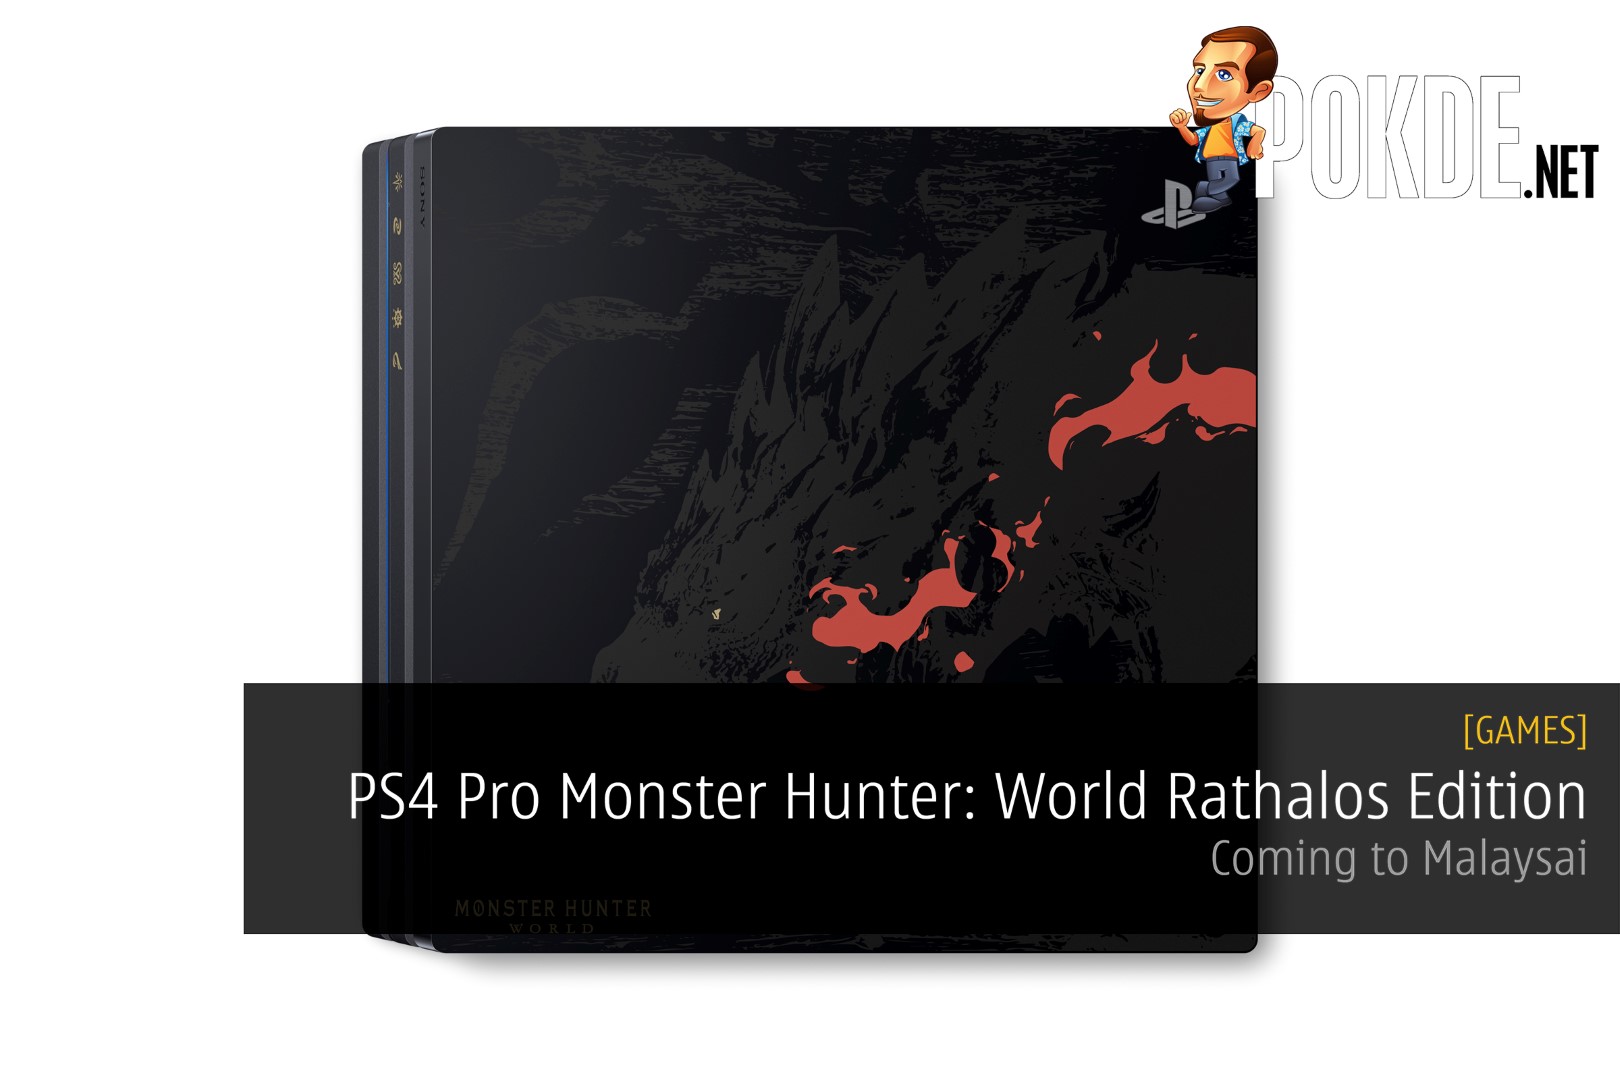 PS4 Pro Monster Hunter: World Rathalos Edition Is Coming To Malaysia! 41